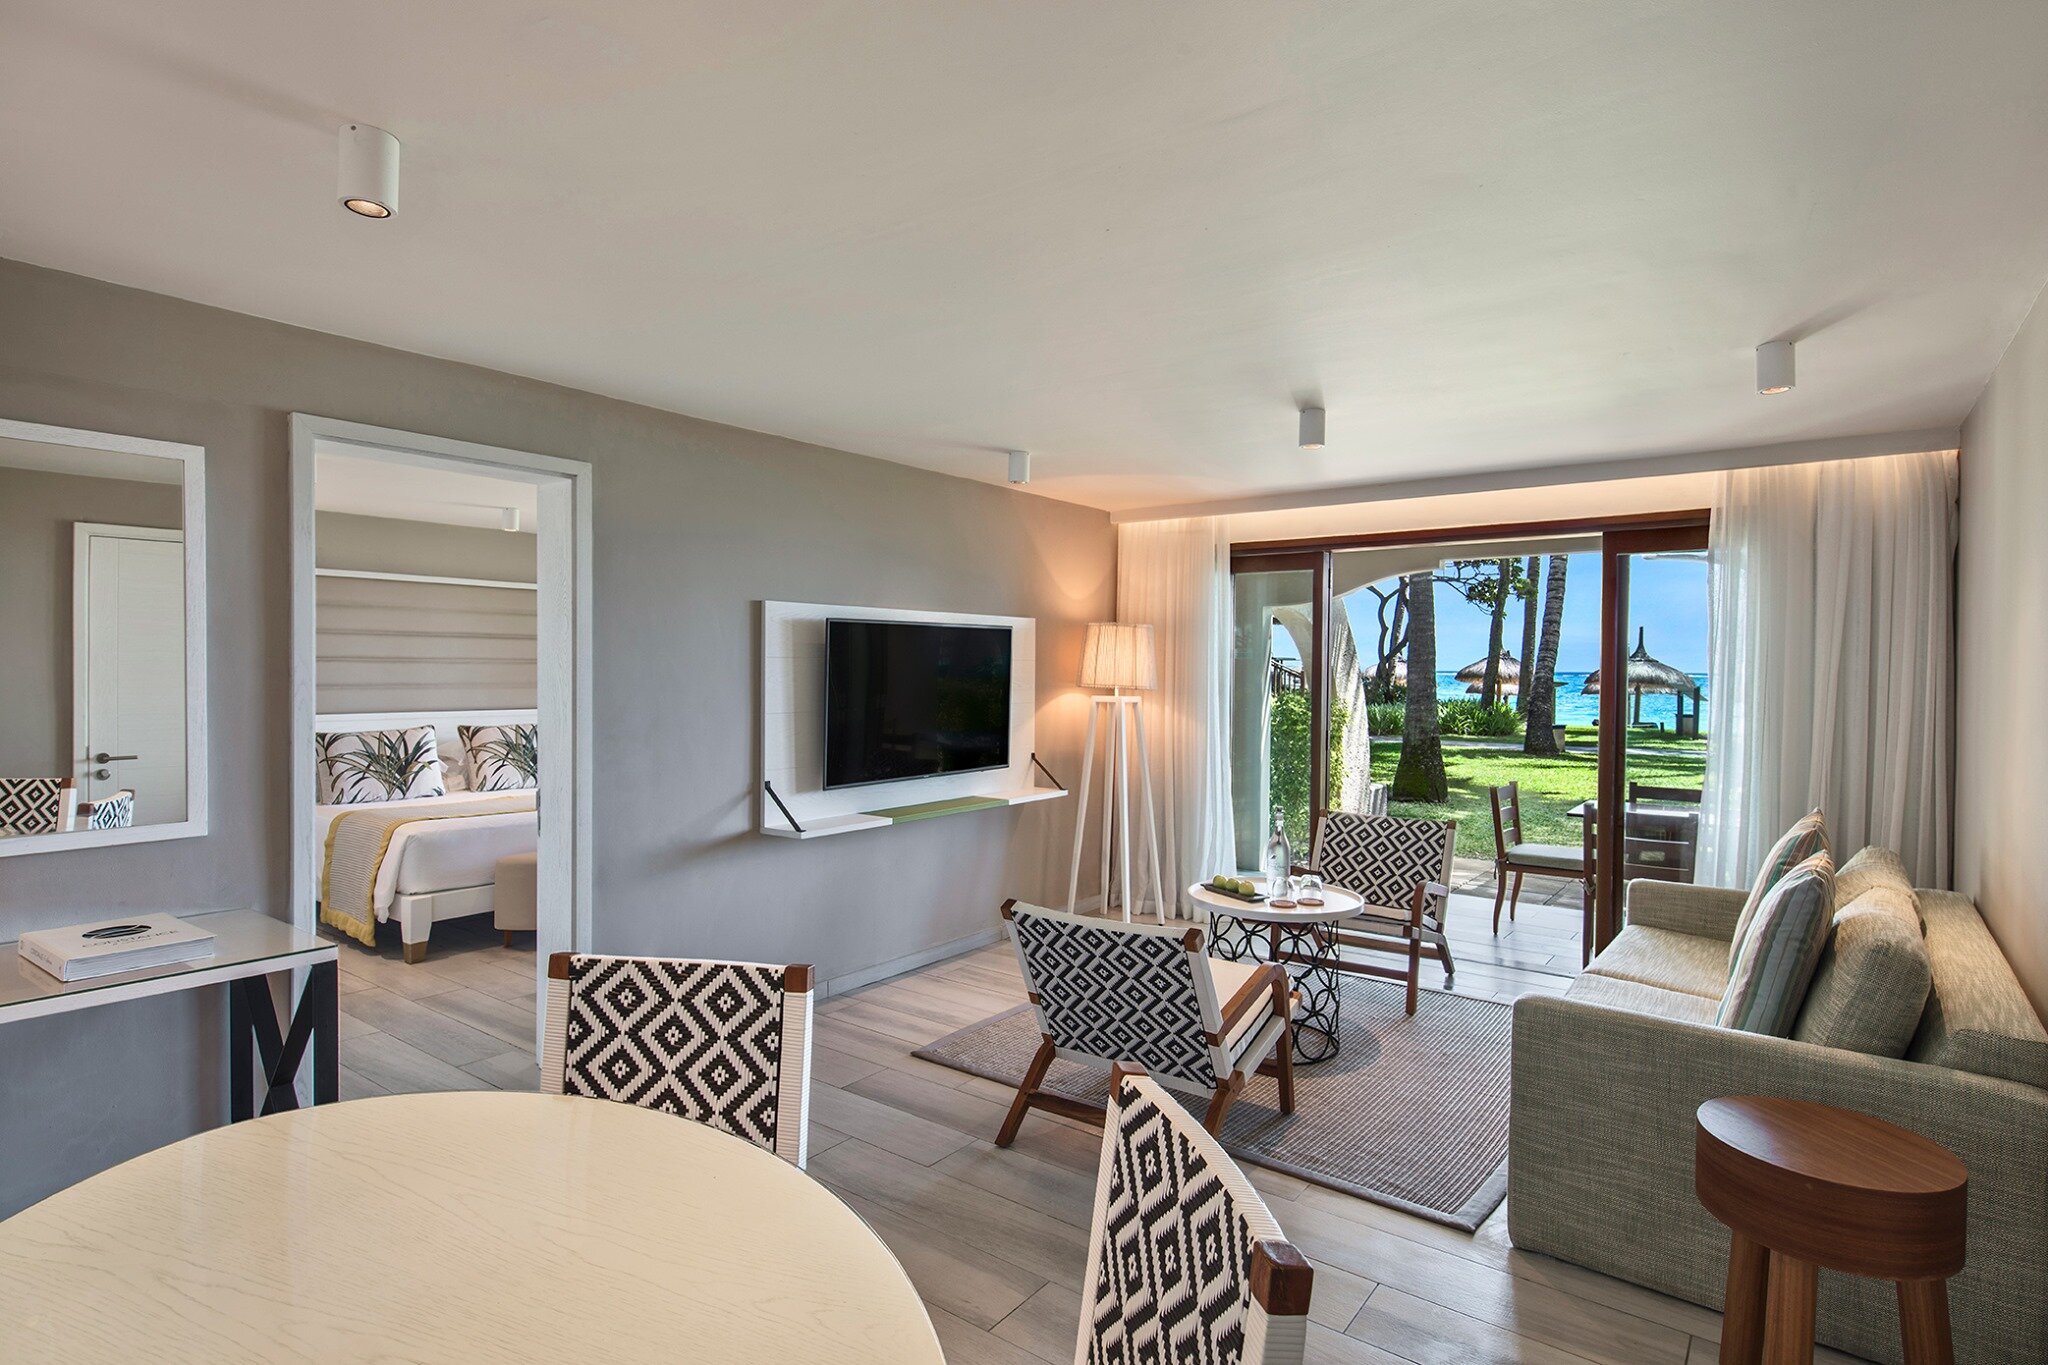 mauritius-constance-belle-mare-plage-deluxe-suite-wadidestination.jpg